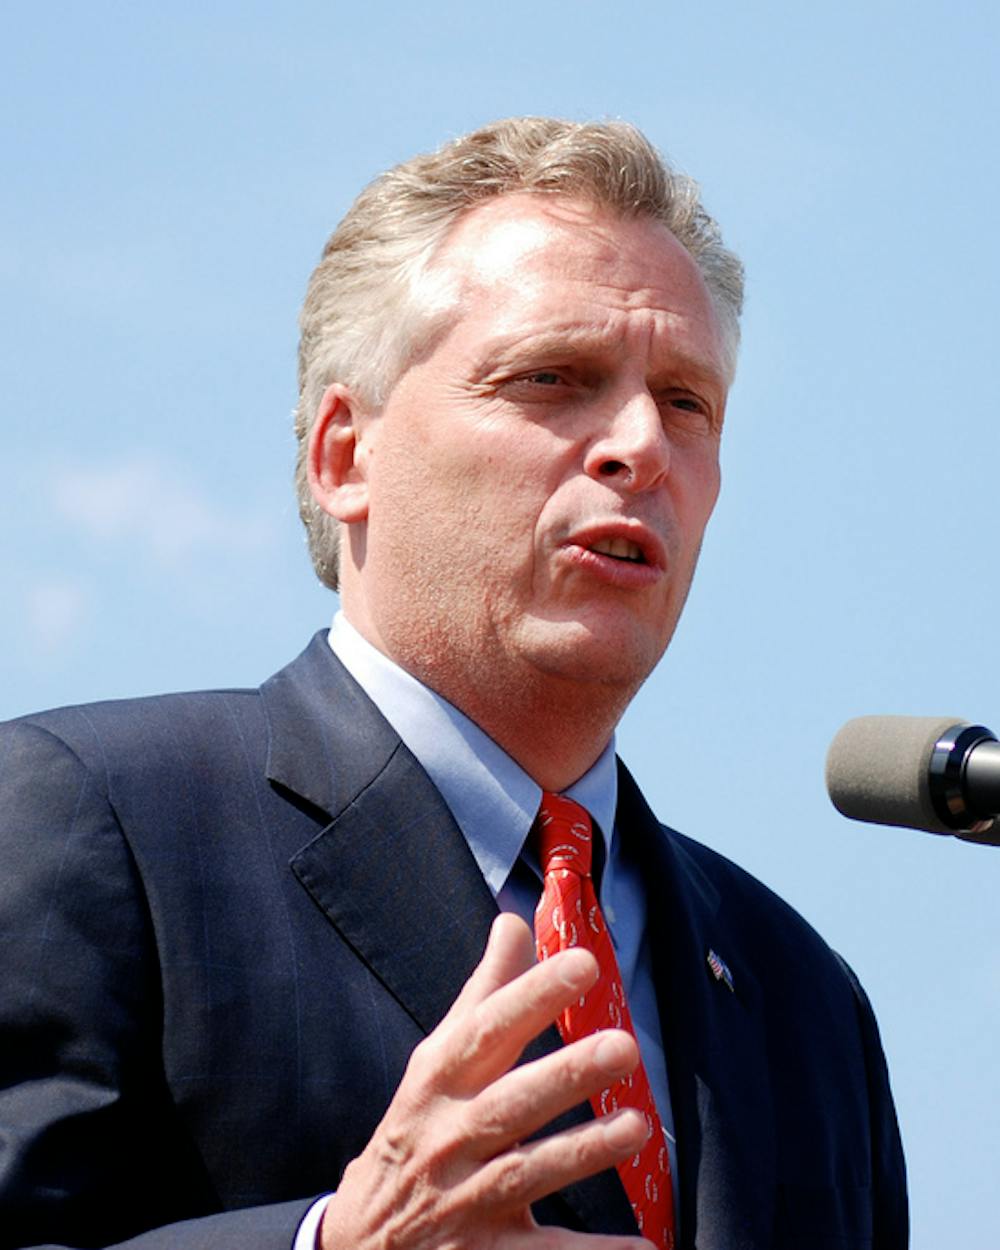 <p>Terry&nbsp;McAuliffe is still allowed to grant voting rights on a case-by-case basis and has <a href="http://www.cavalierdaily.com/article/2016/08/mcauliffe-restores-voting-rights-to-13000-felons">restored rights to 13,000 felons</a> on an individual basis.</p>